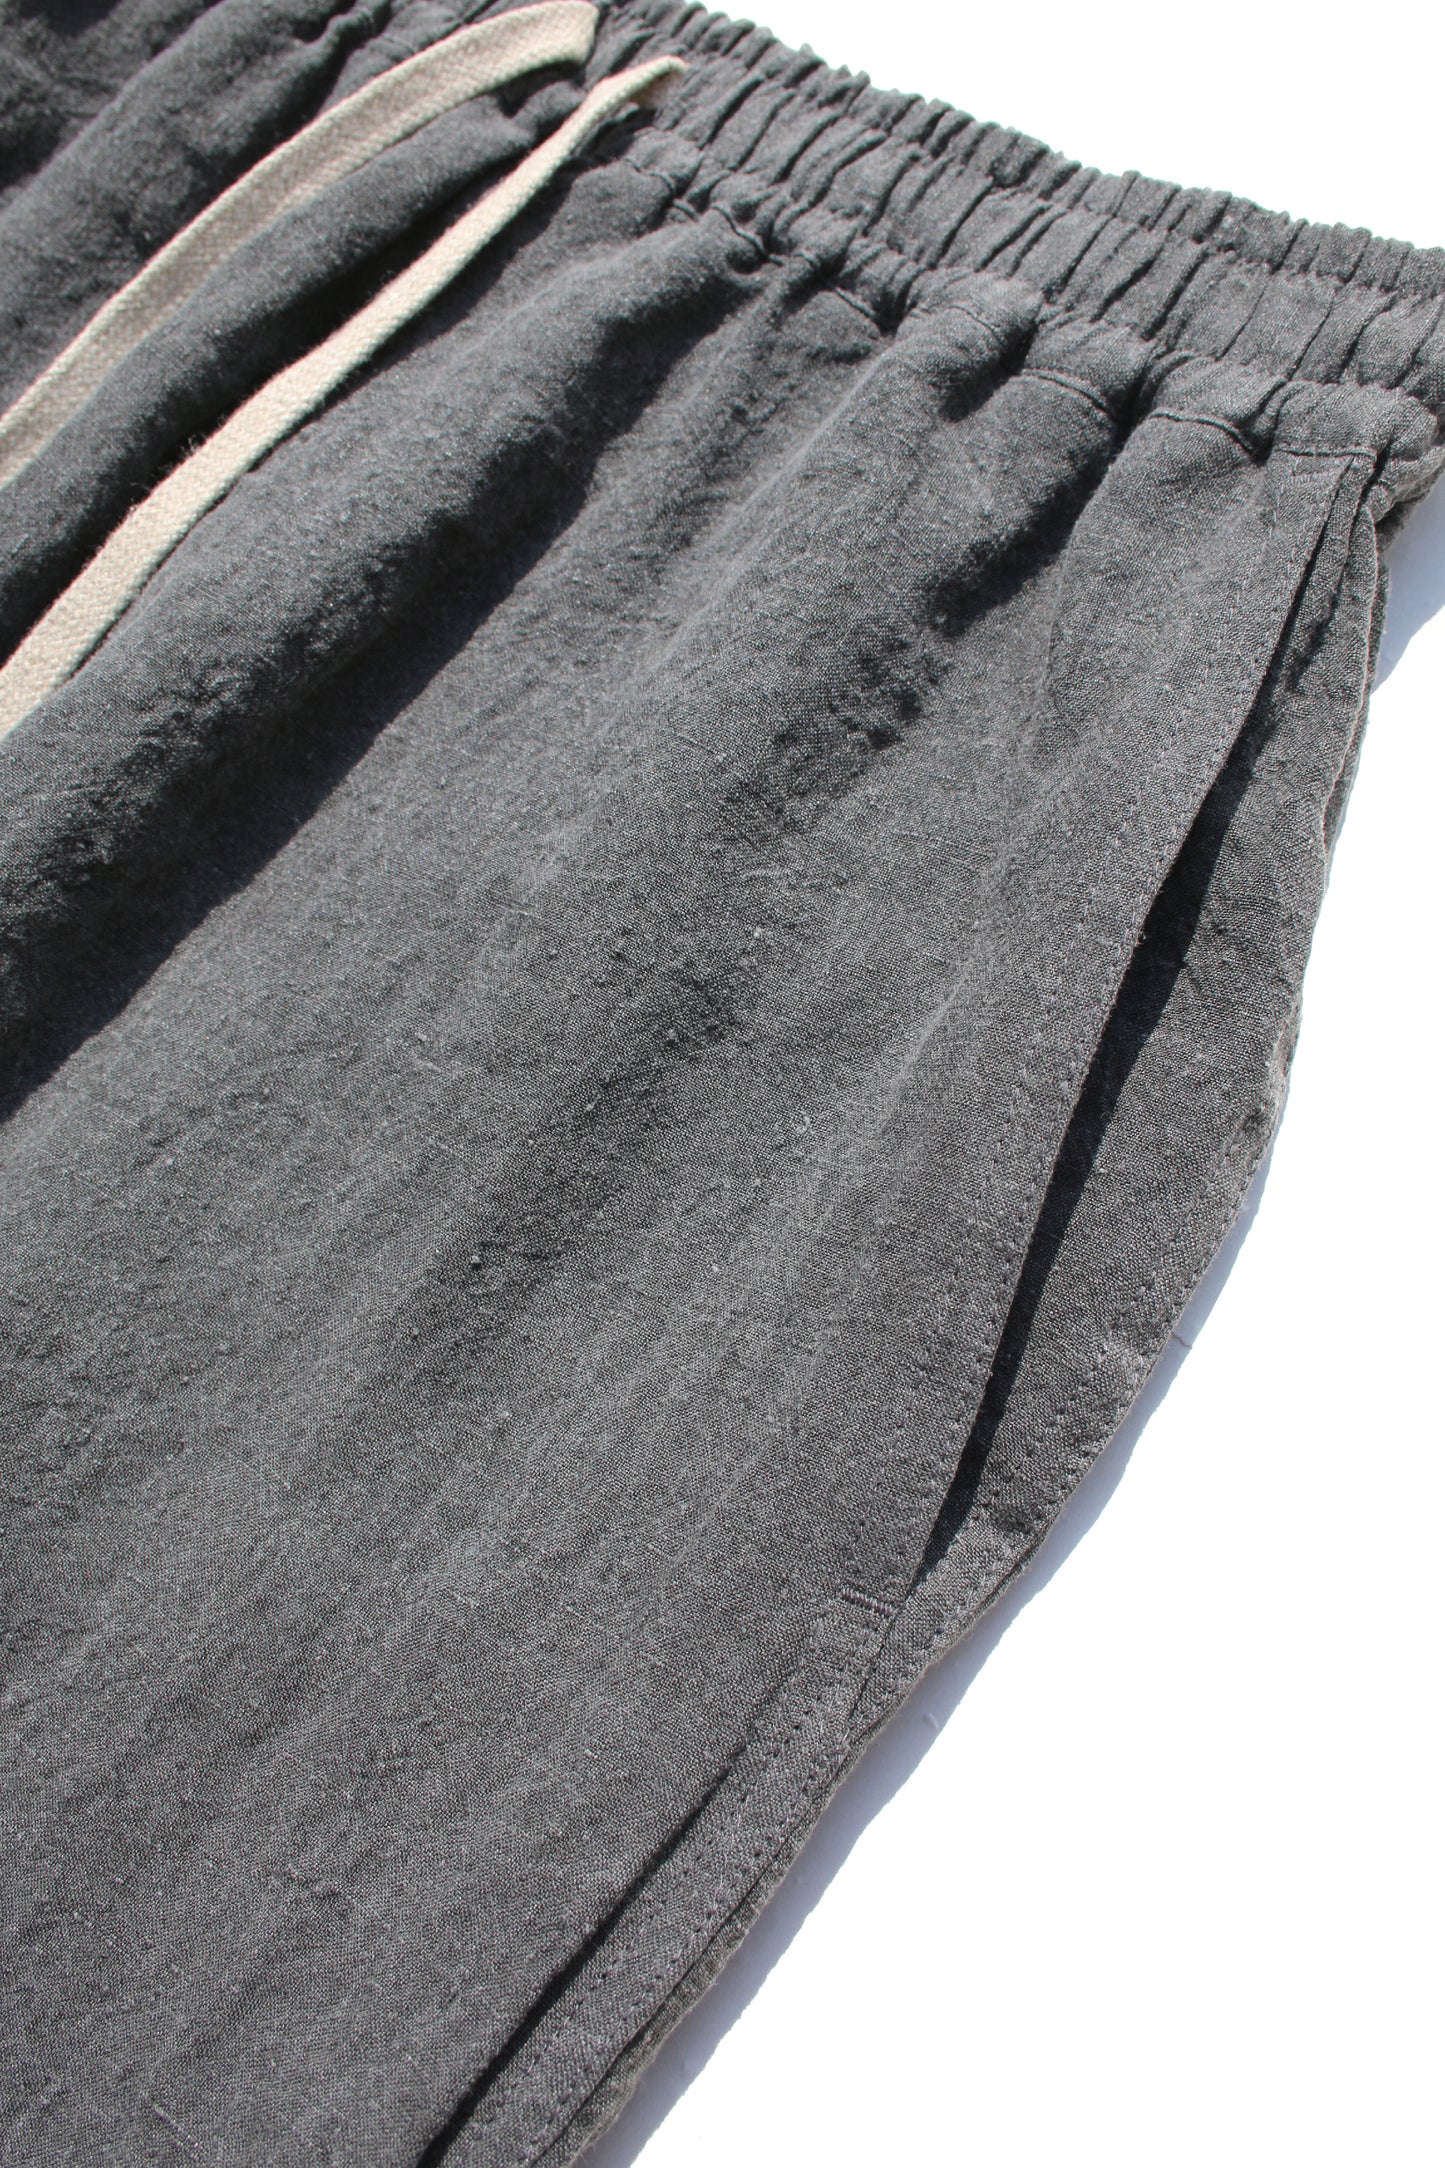 O PROJECT FLAX LAWN JOGGING TROUSERS - DK SUMI DYED